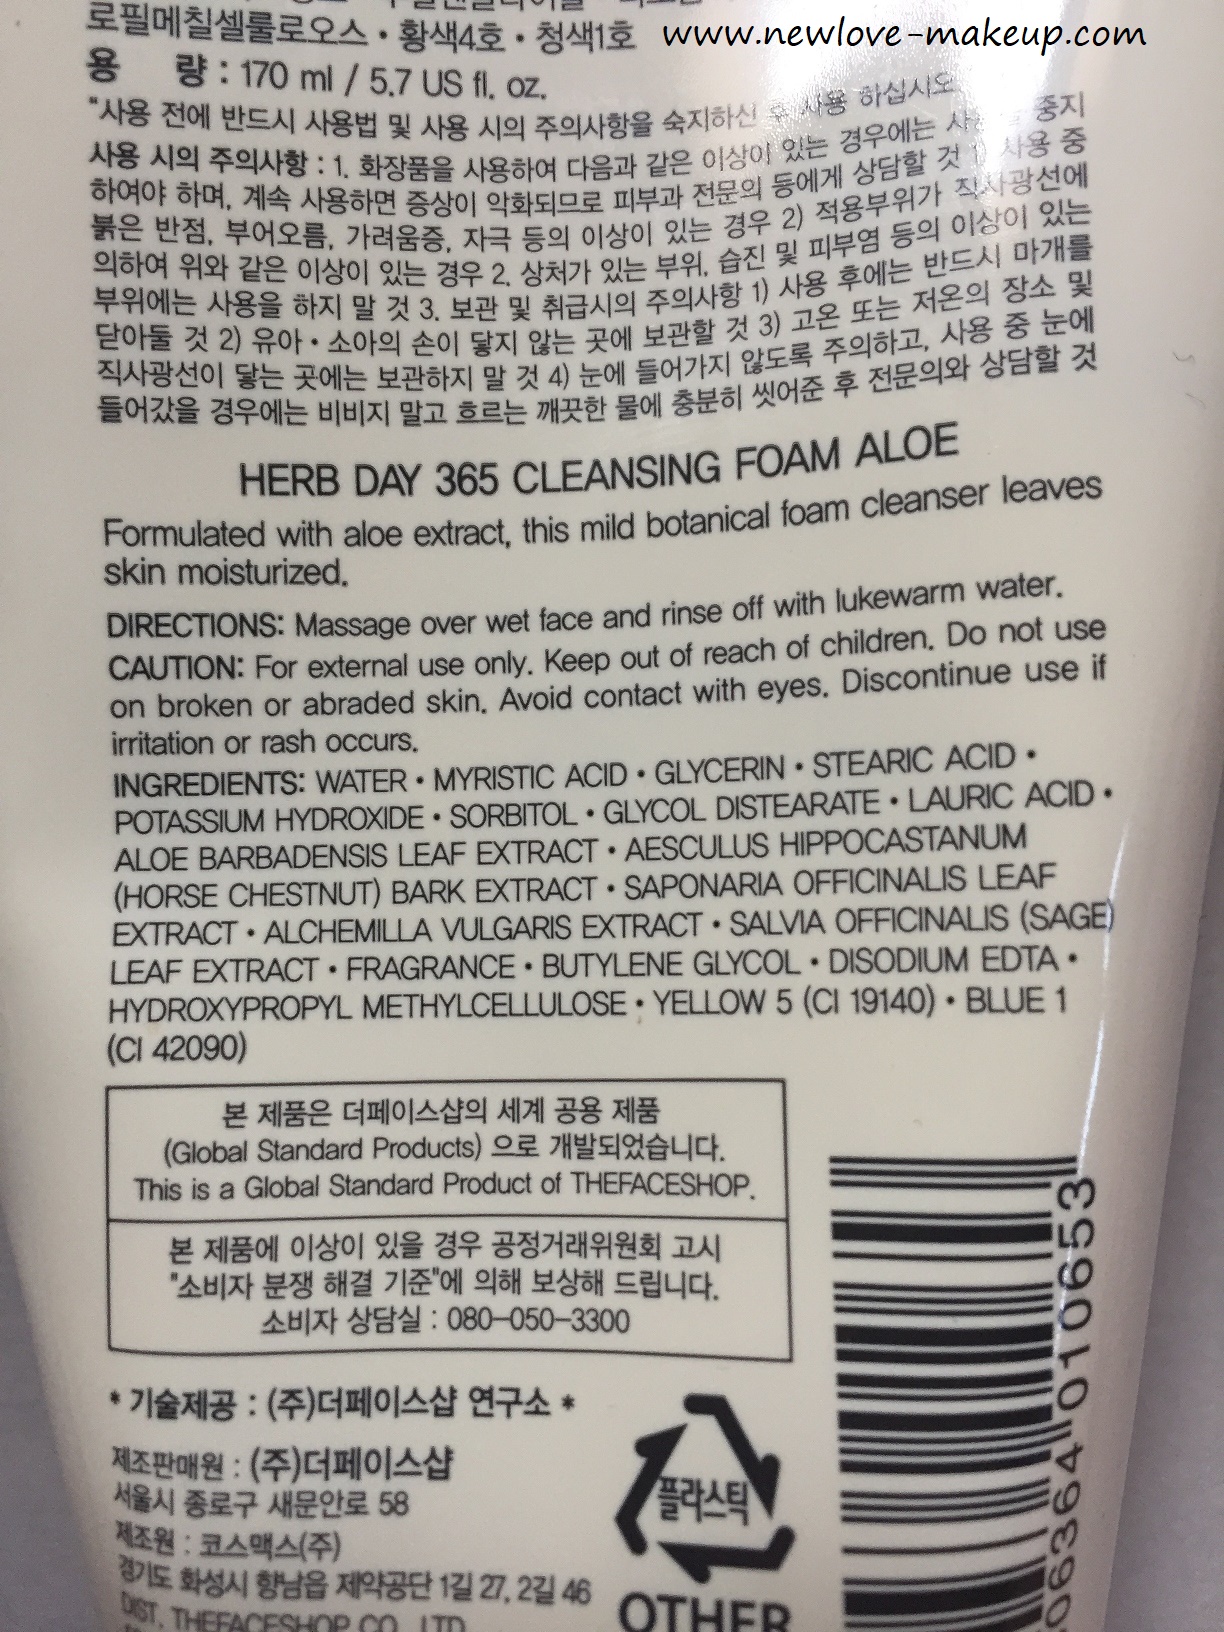 The Face Shop Herb Day 365 Cleansing Foam Aloe Face Wash Review